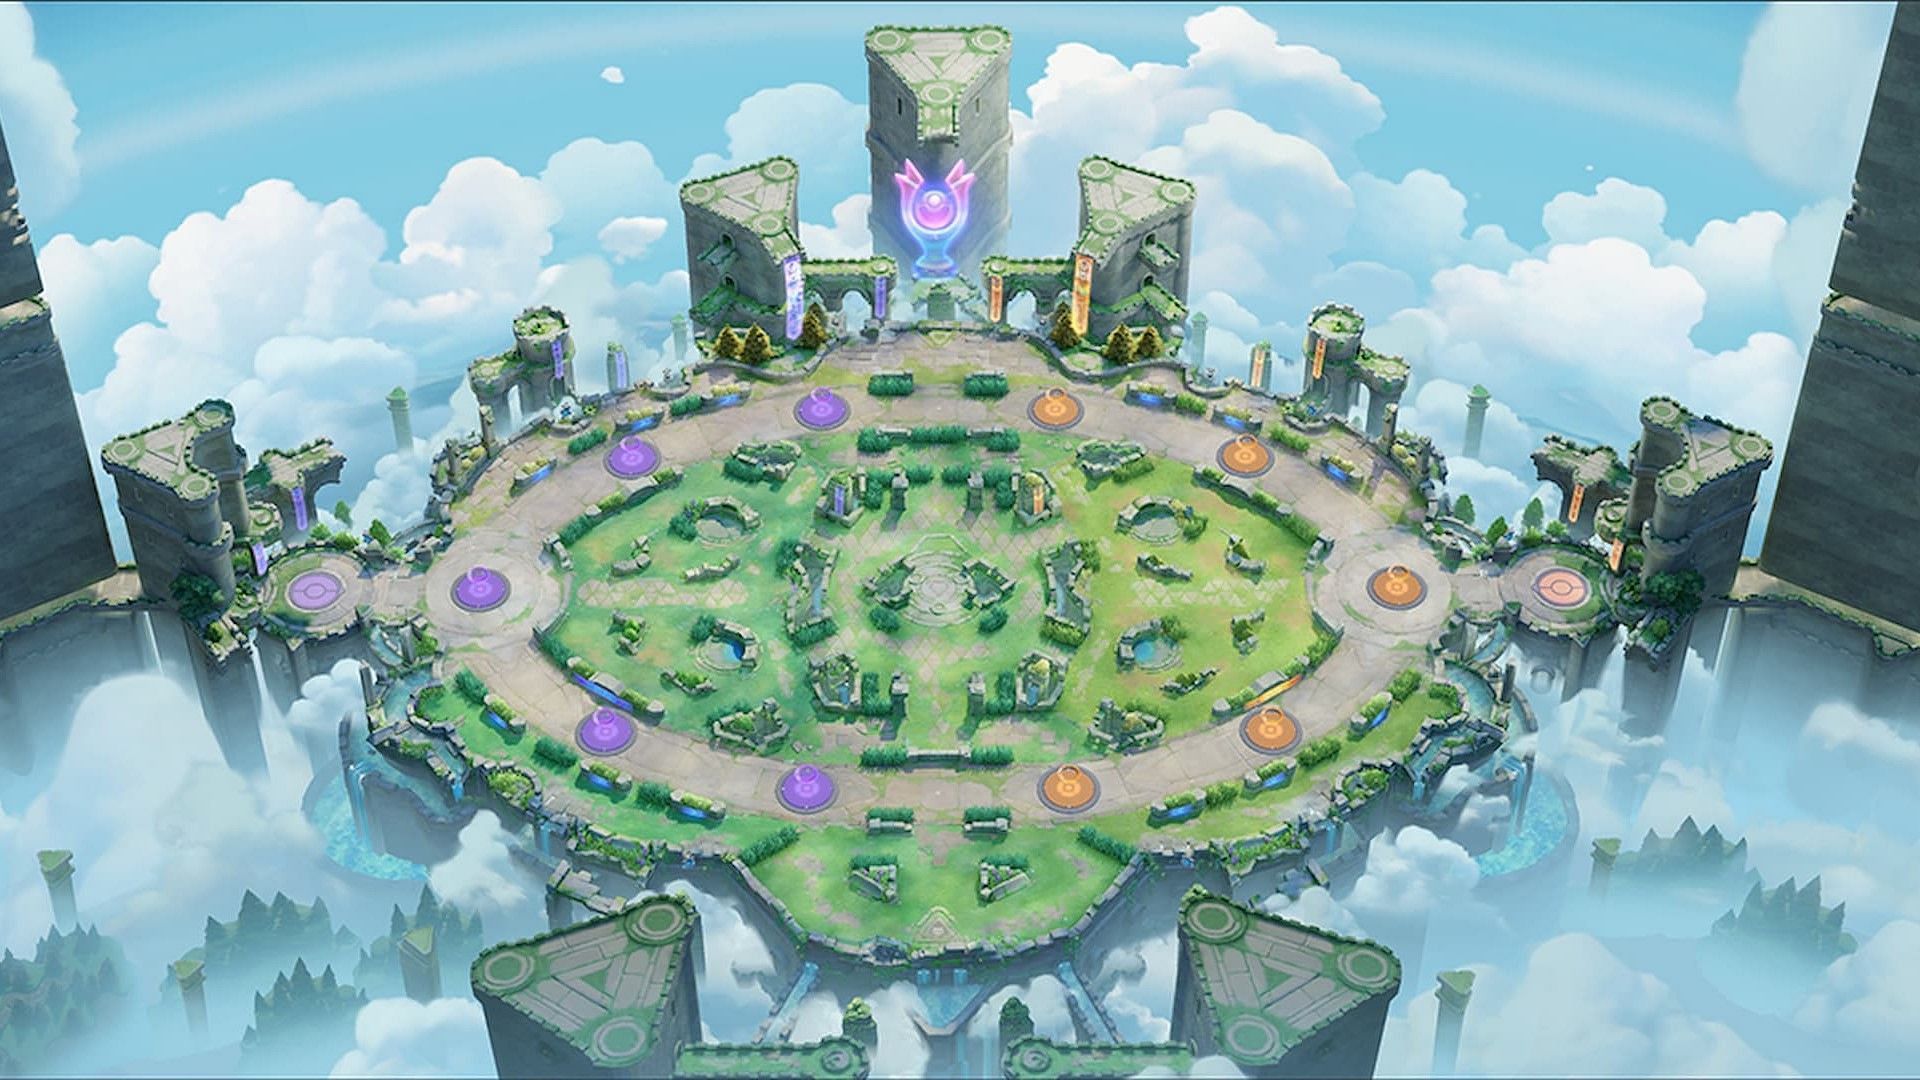 Theia Sky Ruins is the current map in the game (Image via The Pokemon Company)